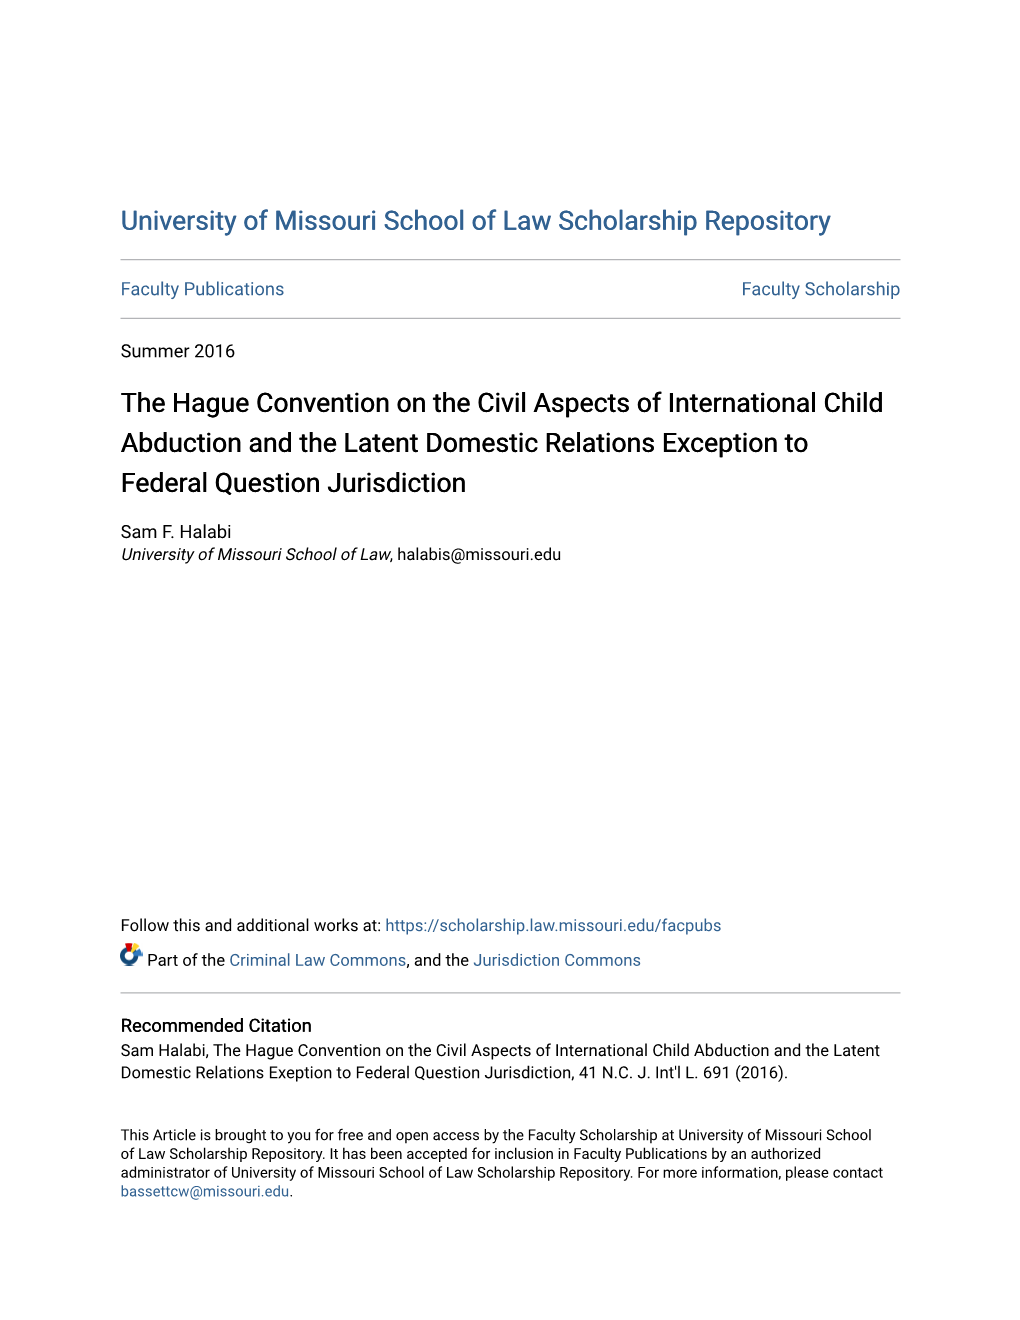 The Hague Convention on the Civil Aspects of International Child Abduction and the Latent Domestic Relations Exception to Federal Question Jurisdiction